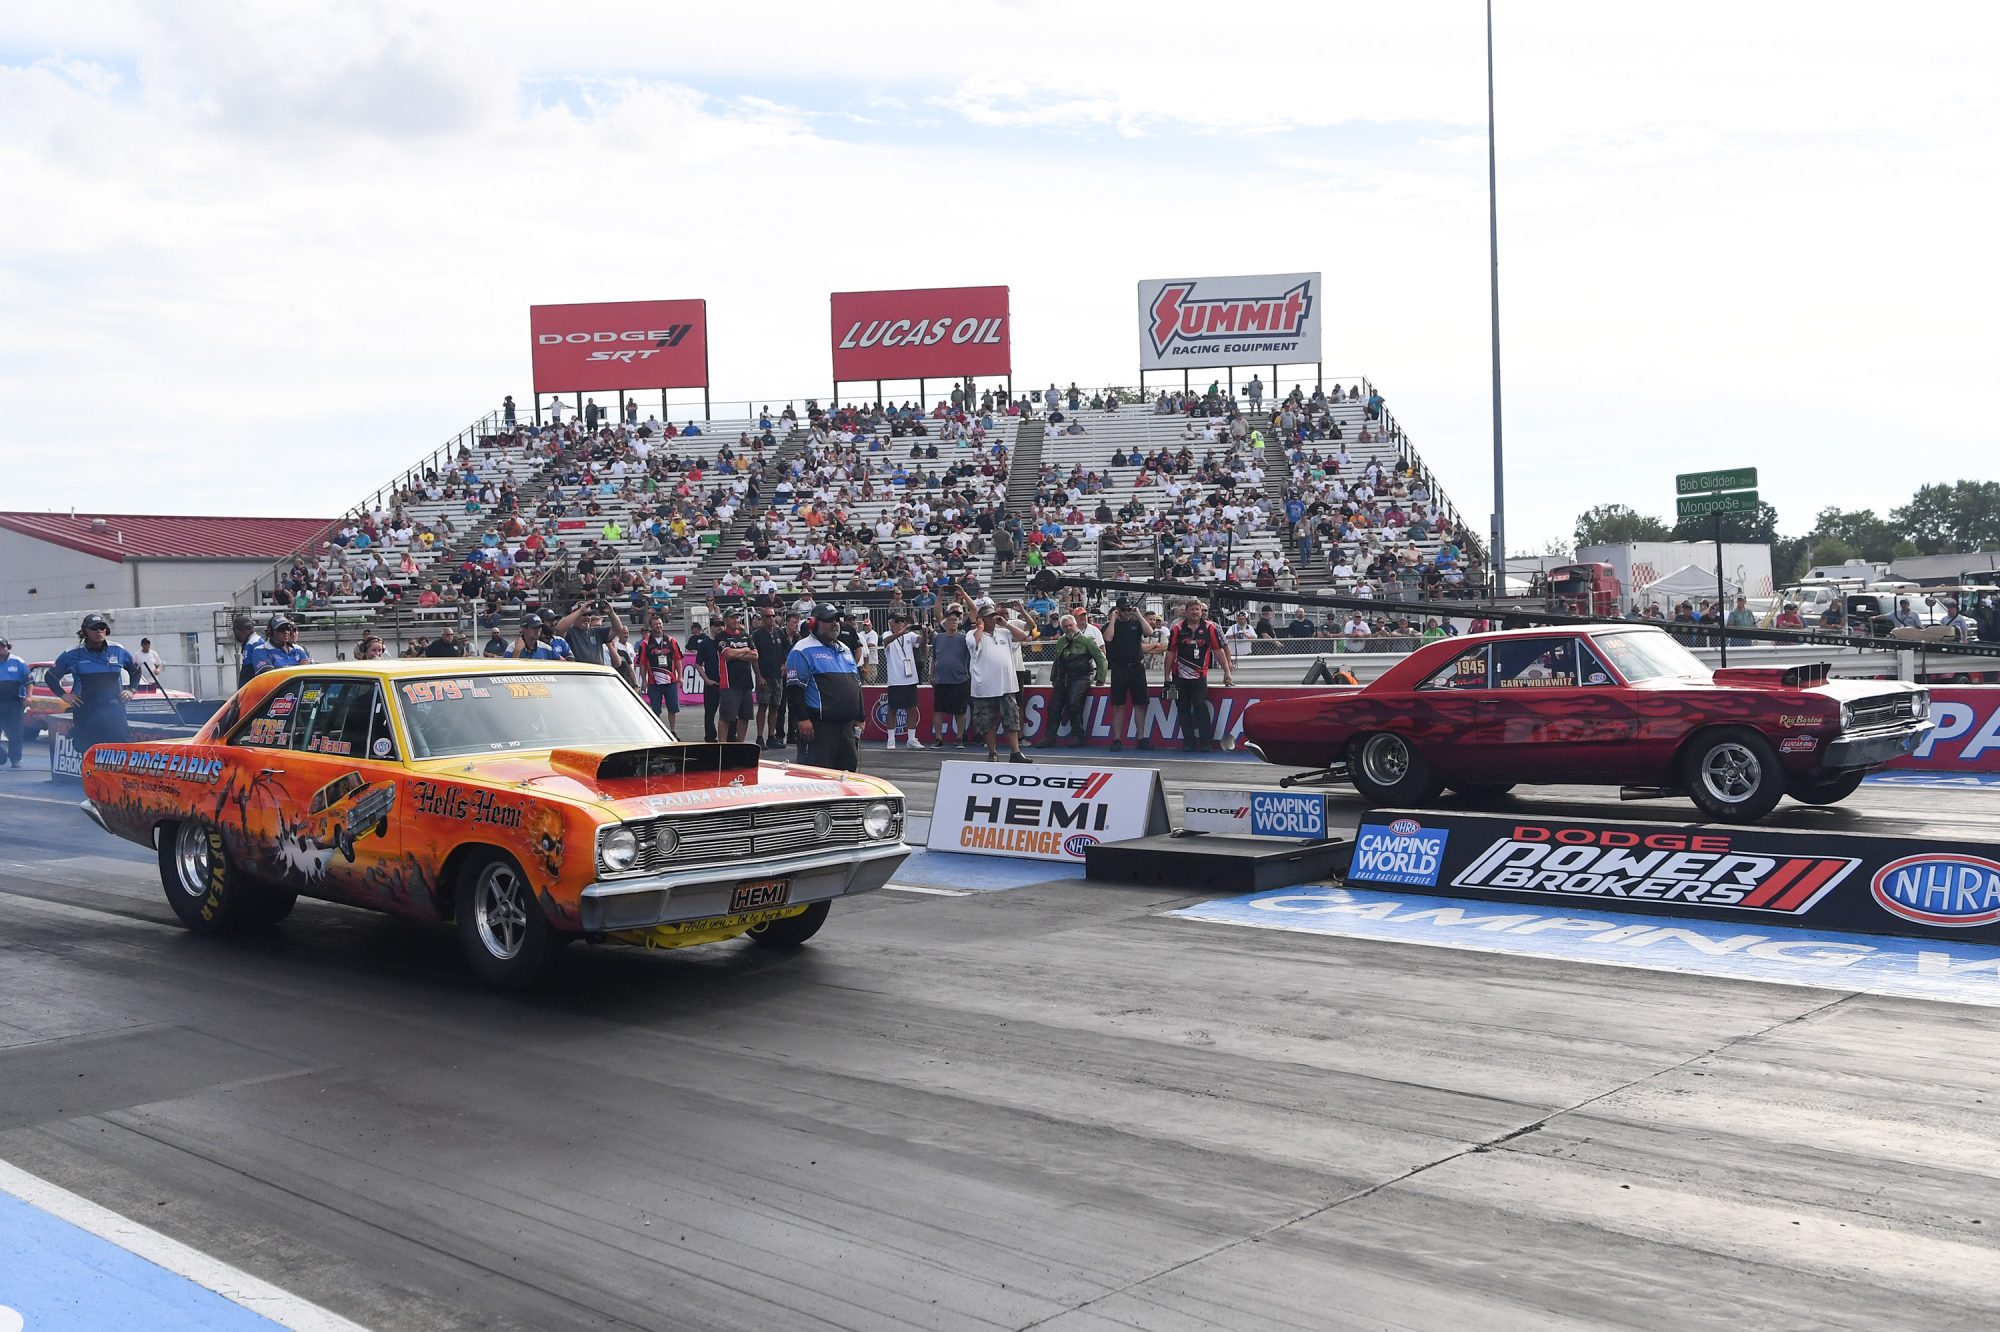 Comella Captures Second Consecutive Dodge HEMI® Challenge Victory at 68th Annual Dodge Power Brokers NHRA